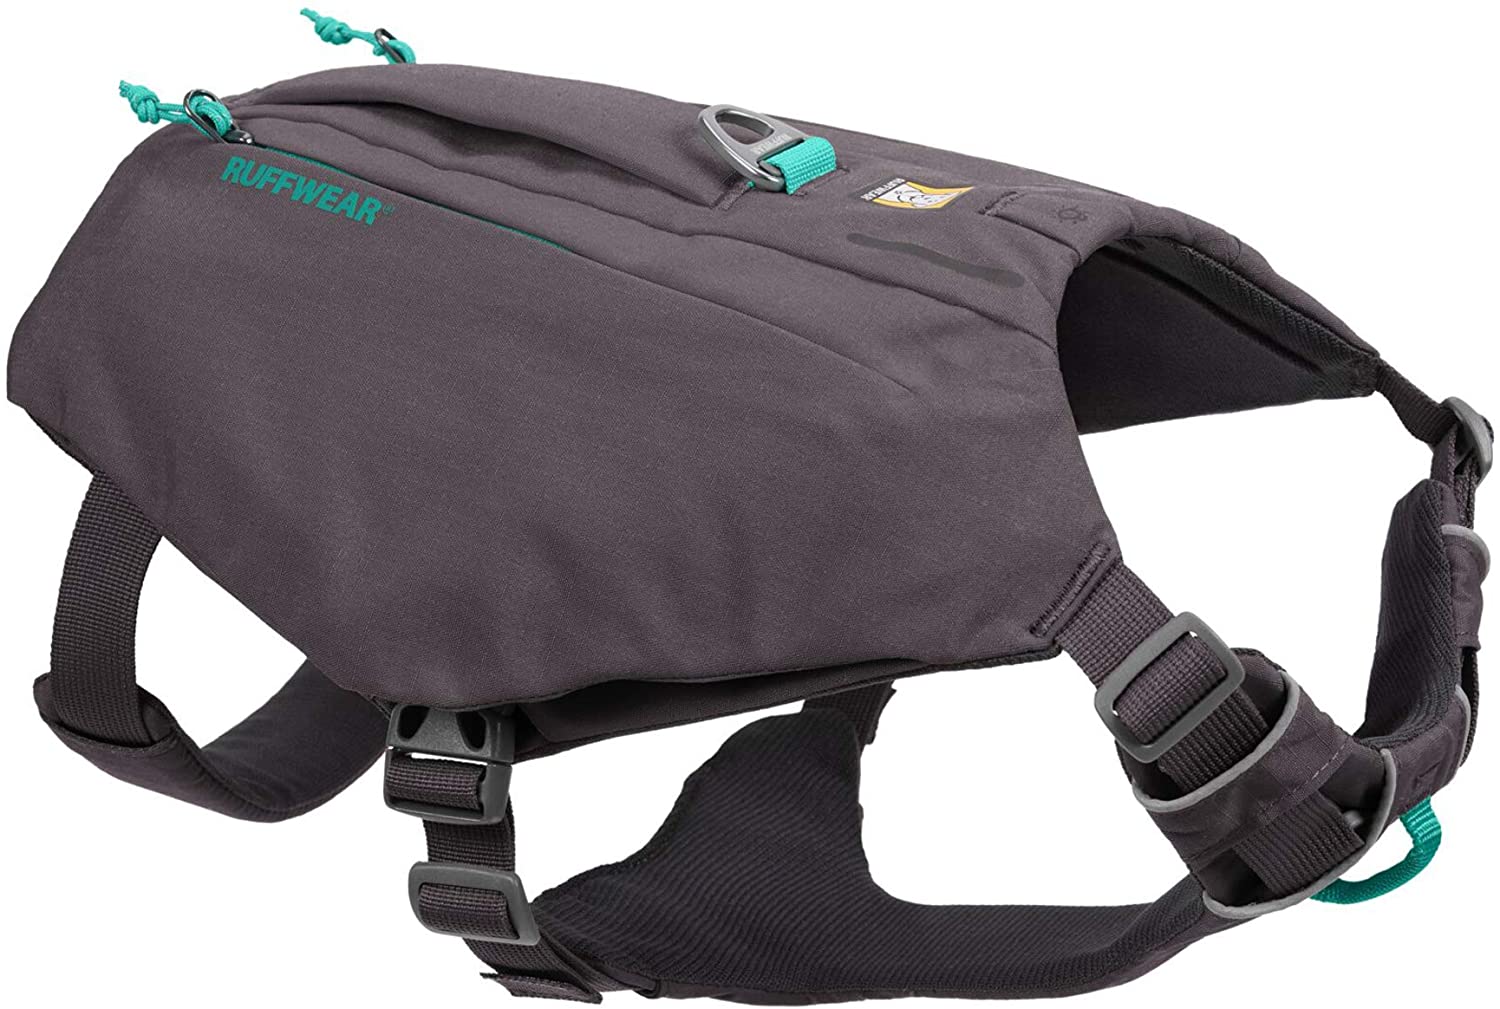 acbags, Dog Harness, Pack & Harness Hybrid for Day Trips & Everyday Use, Granite Gray, Small